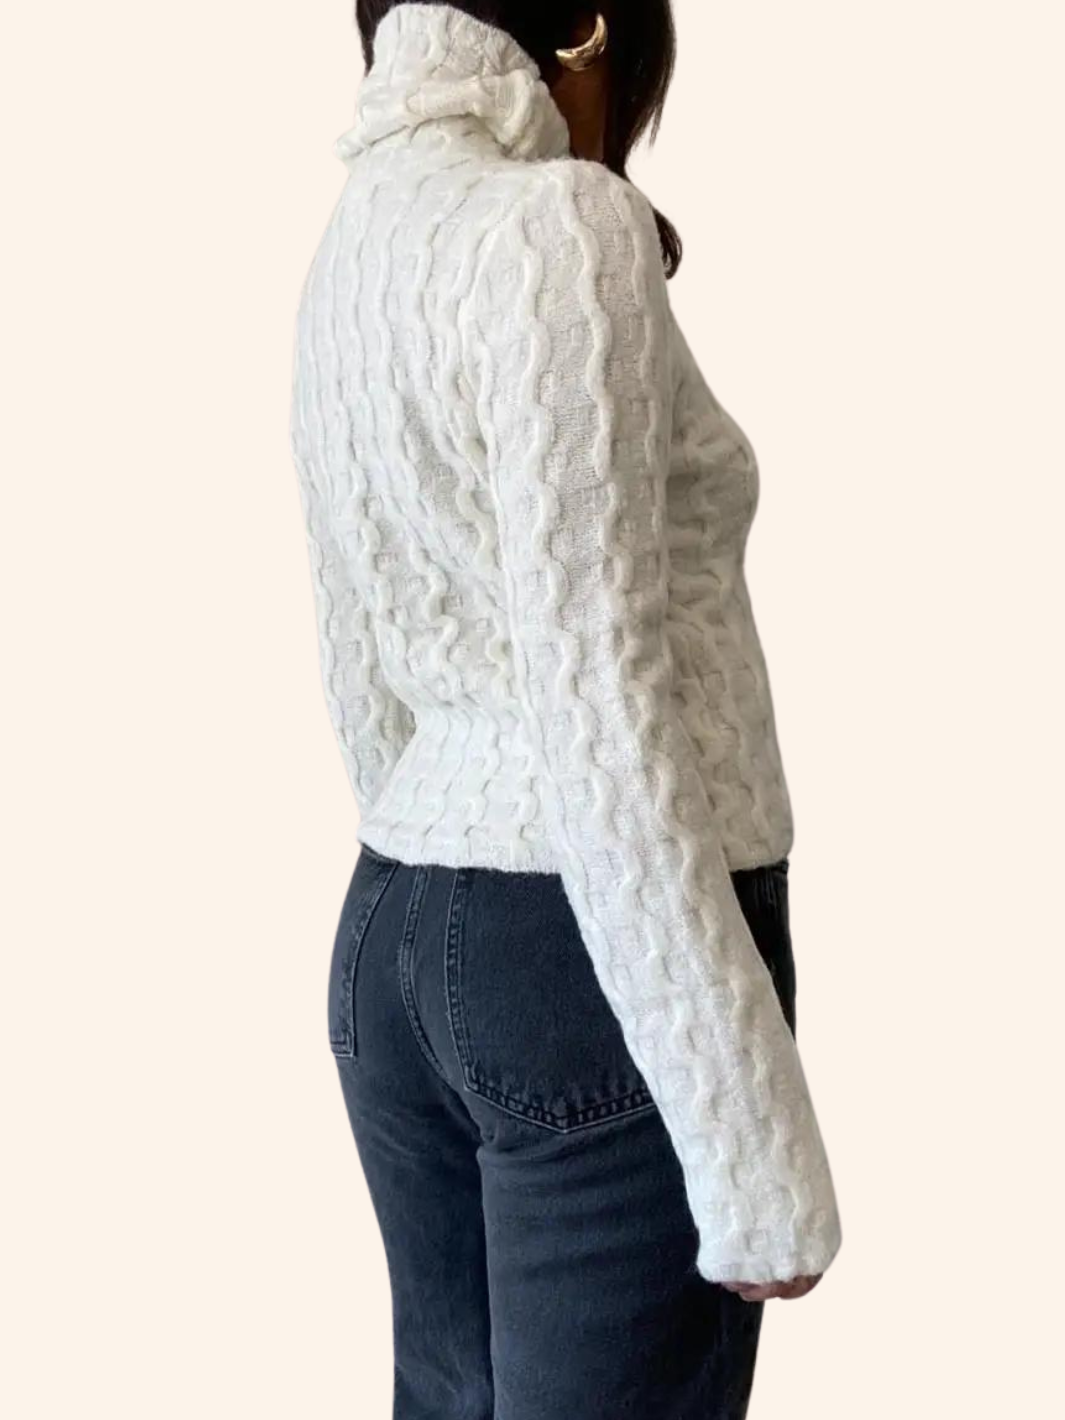 Cable Turtleneck Sweater